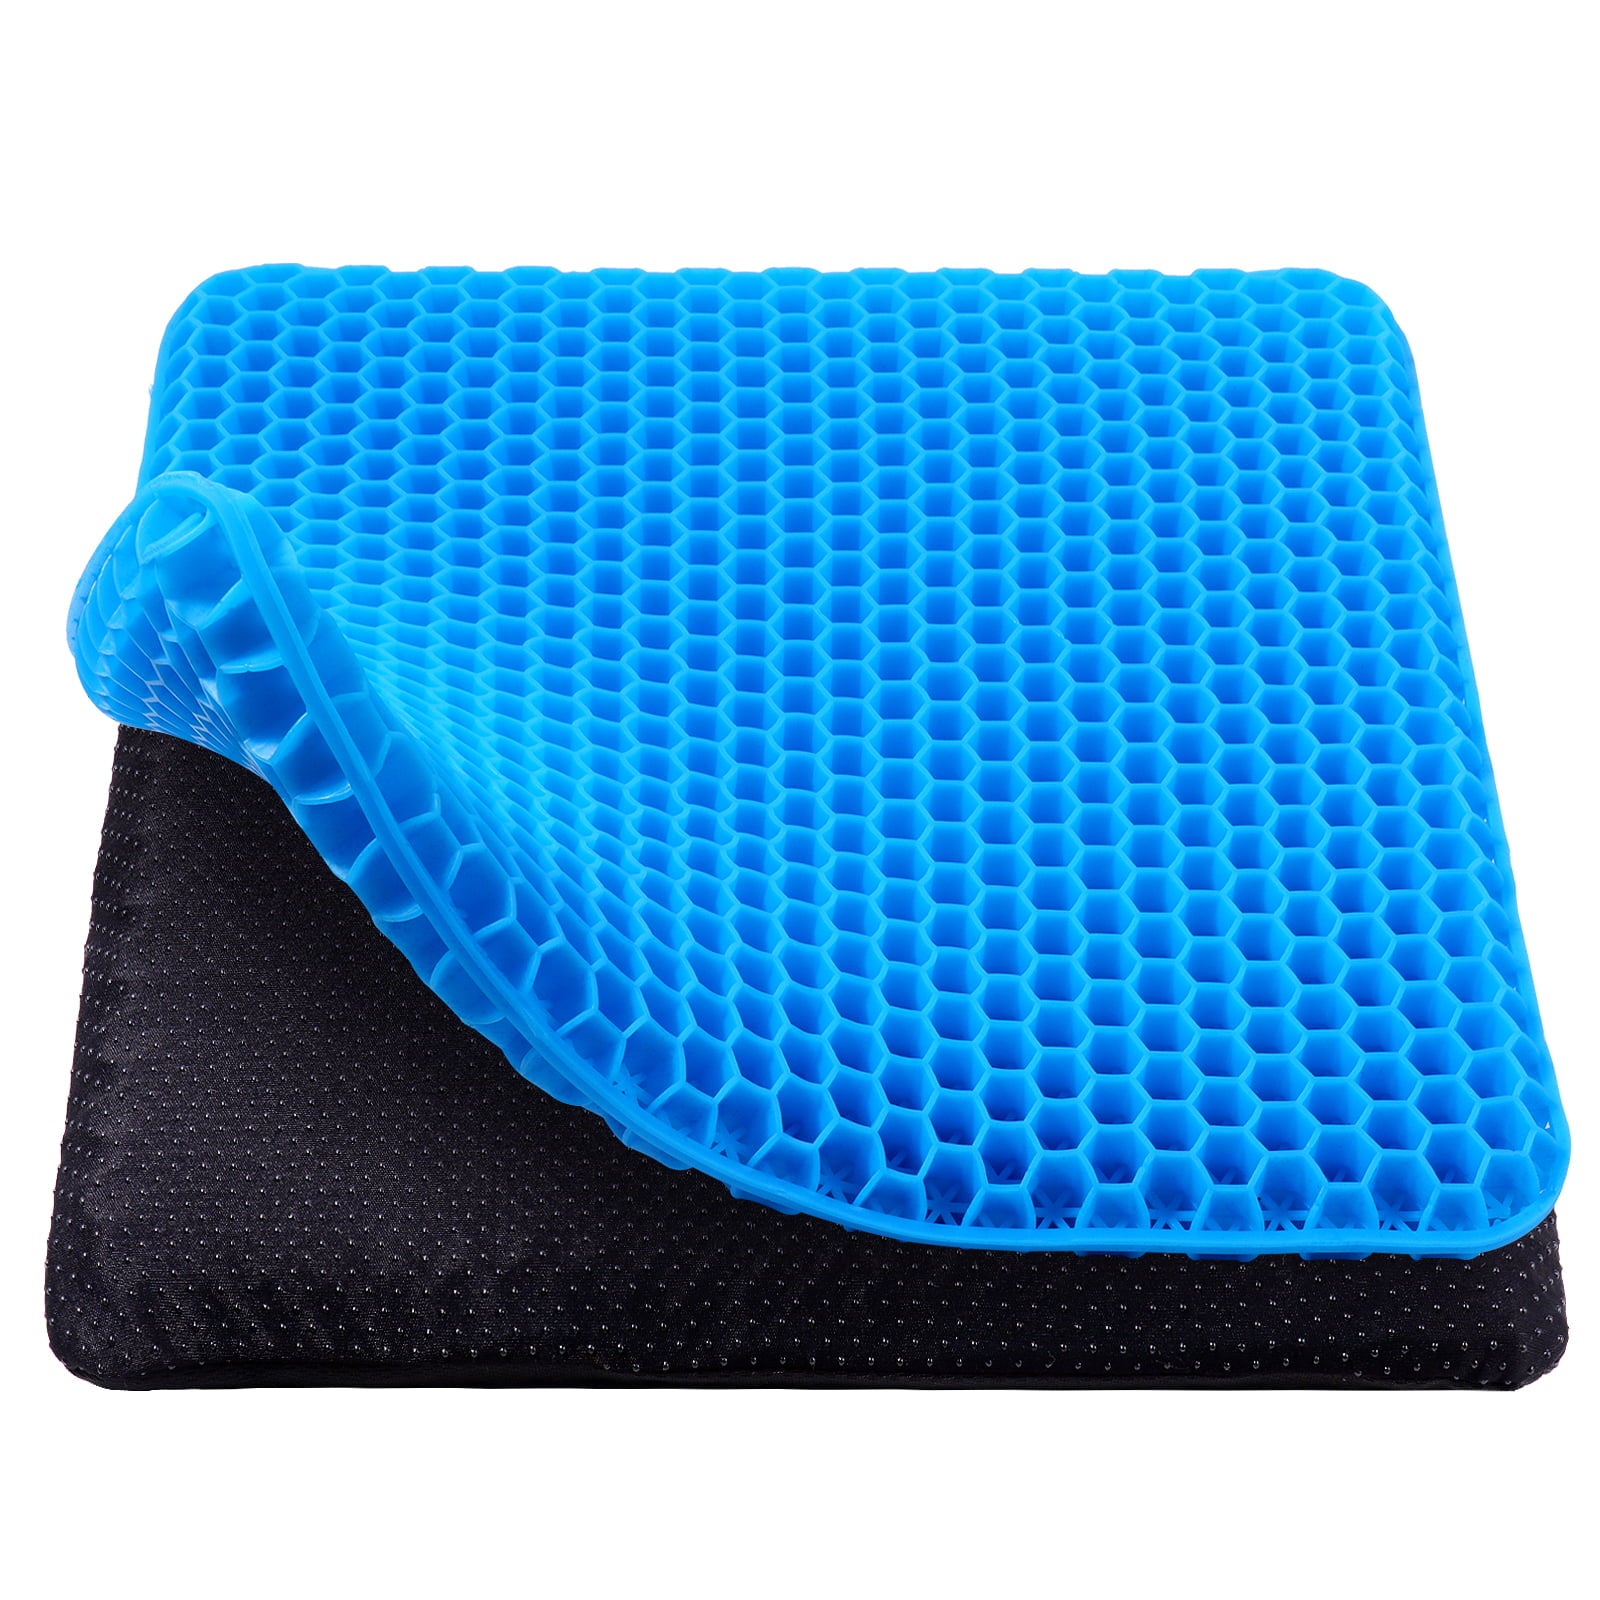 Boxgear Gel Seat Cushion – Cooling Gel Memory Foam Pillow – Seat Cushion for Tailbone Pain Relief, Lumbar Support – Non-Slip Gel Seat Cushion for Chair, Office, Gaming, Driving Seat